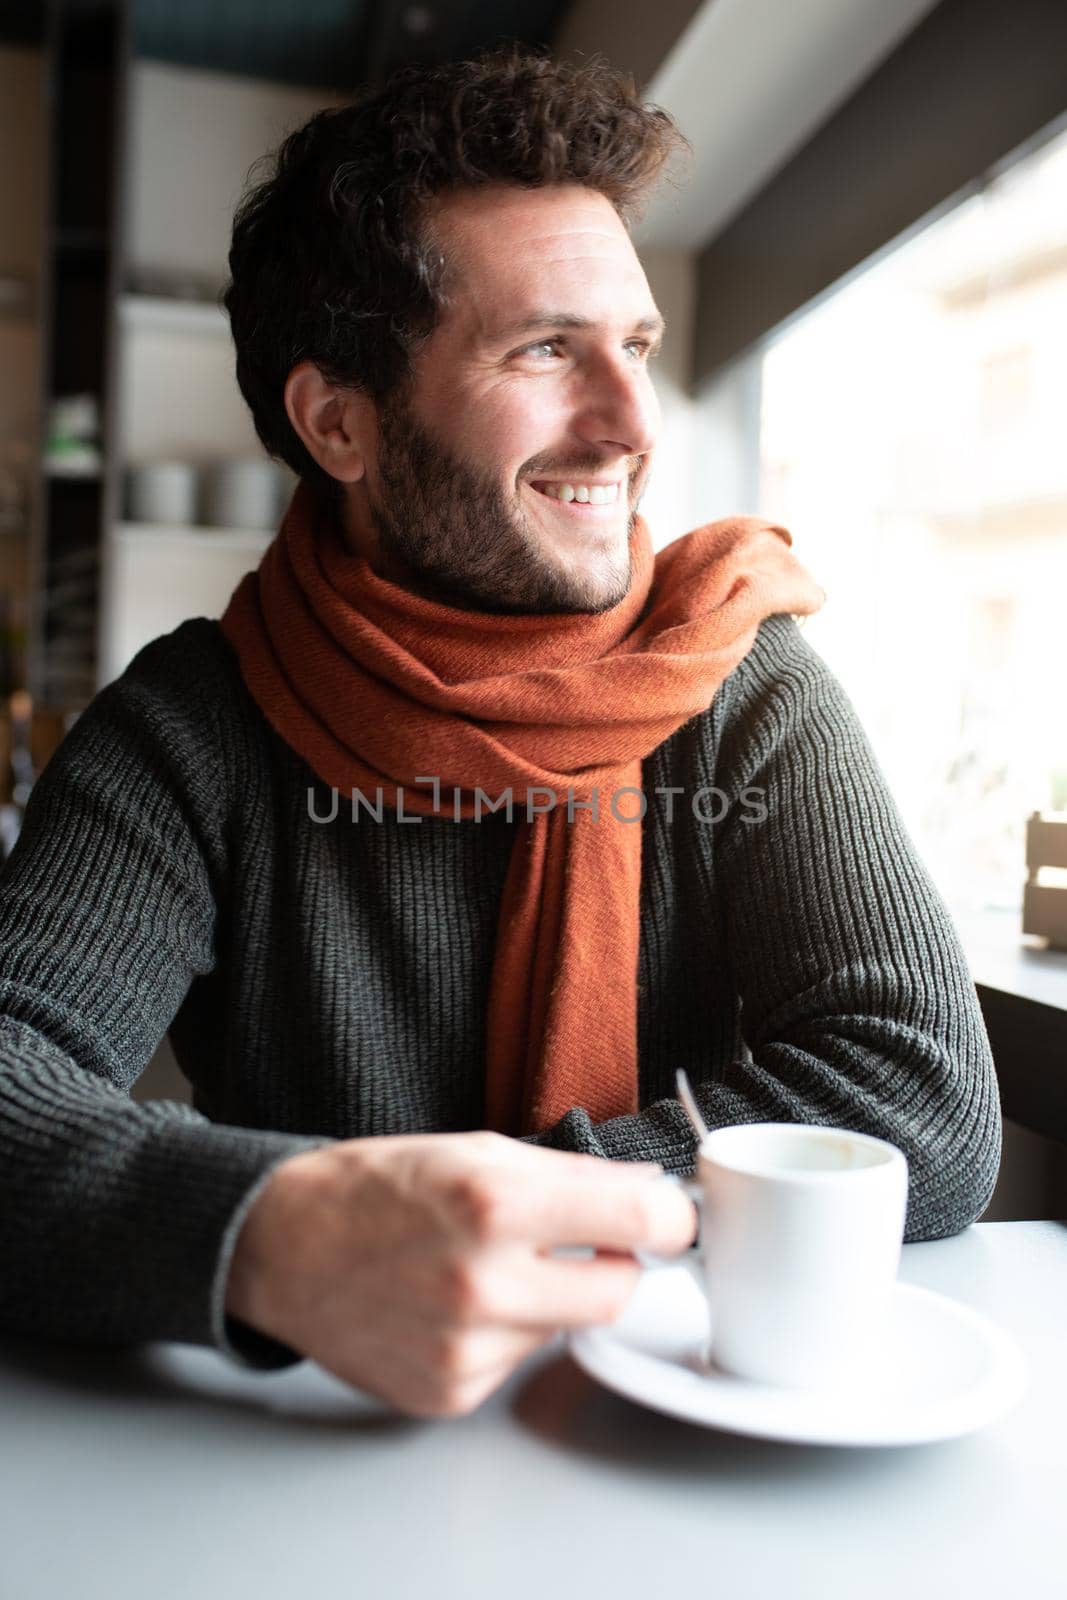 Vertical portrait of happy man having morning coffee in coffee shop looking out the window. Lifestyle concept.